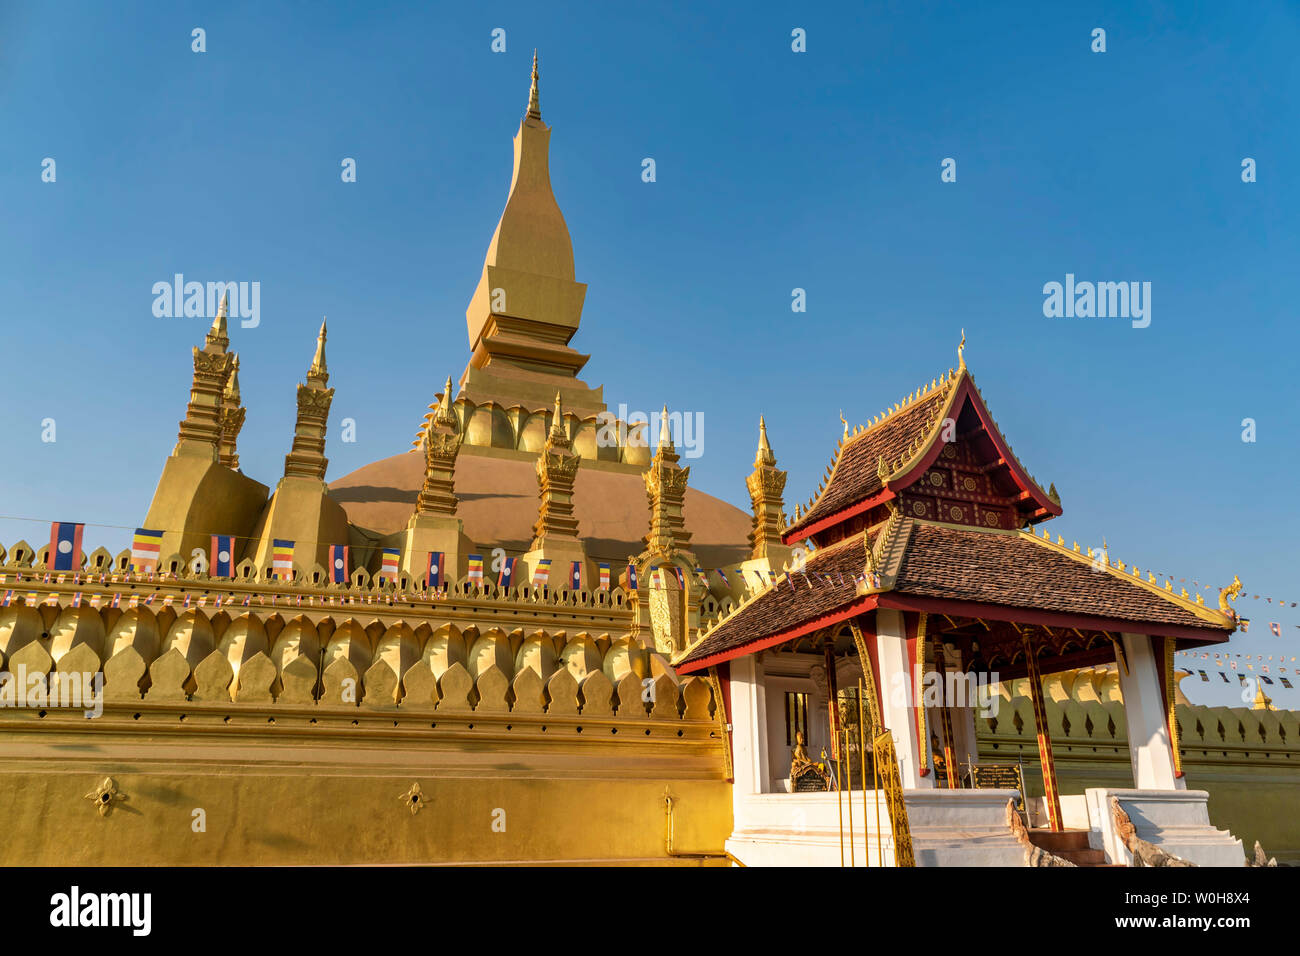 Pha That Luang temple, Vientiane, Laos, Indochina, Southeast Asia, Asia Stock Photo